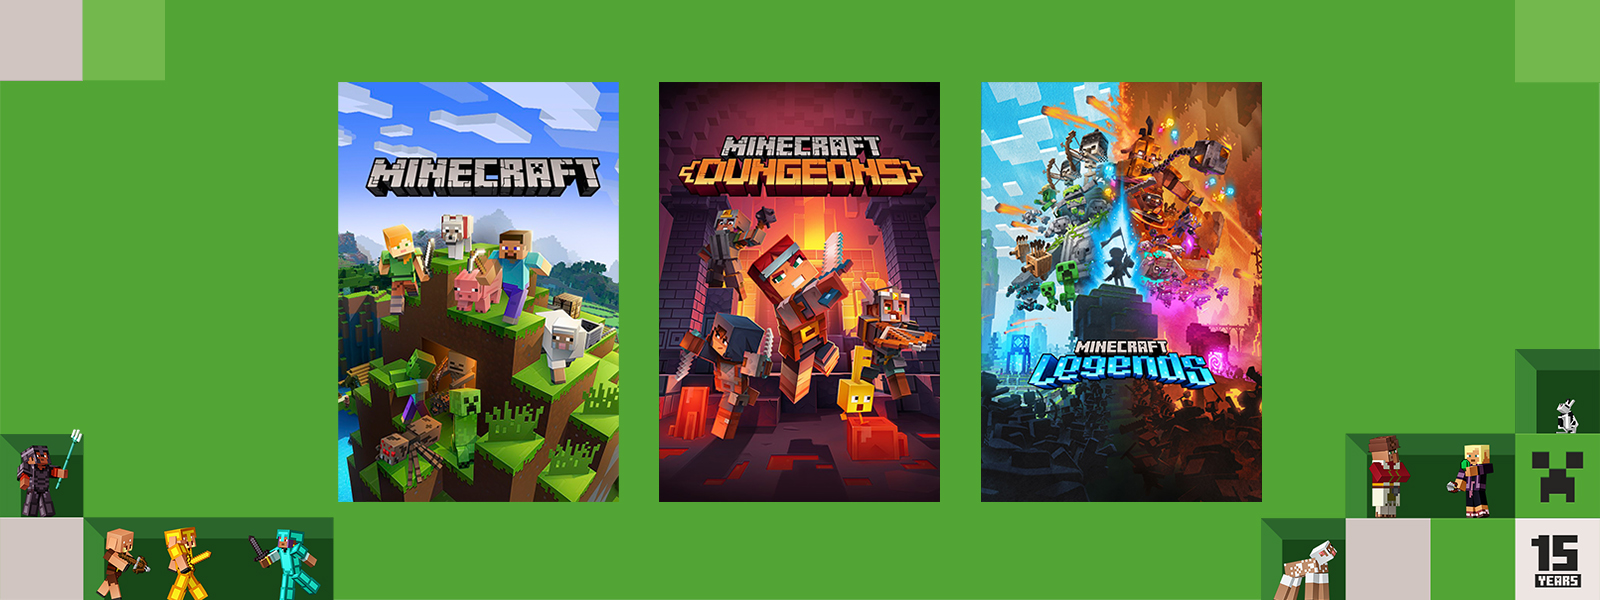 15 years, Small Minecraft characters under box art from games included in the Minecraft Anniversary Sale, including Minecraft, Minecraft Dungeons, and Minecraft Legends.